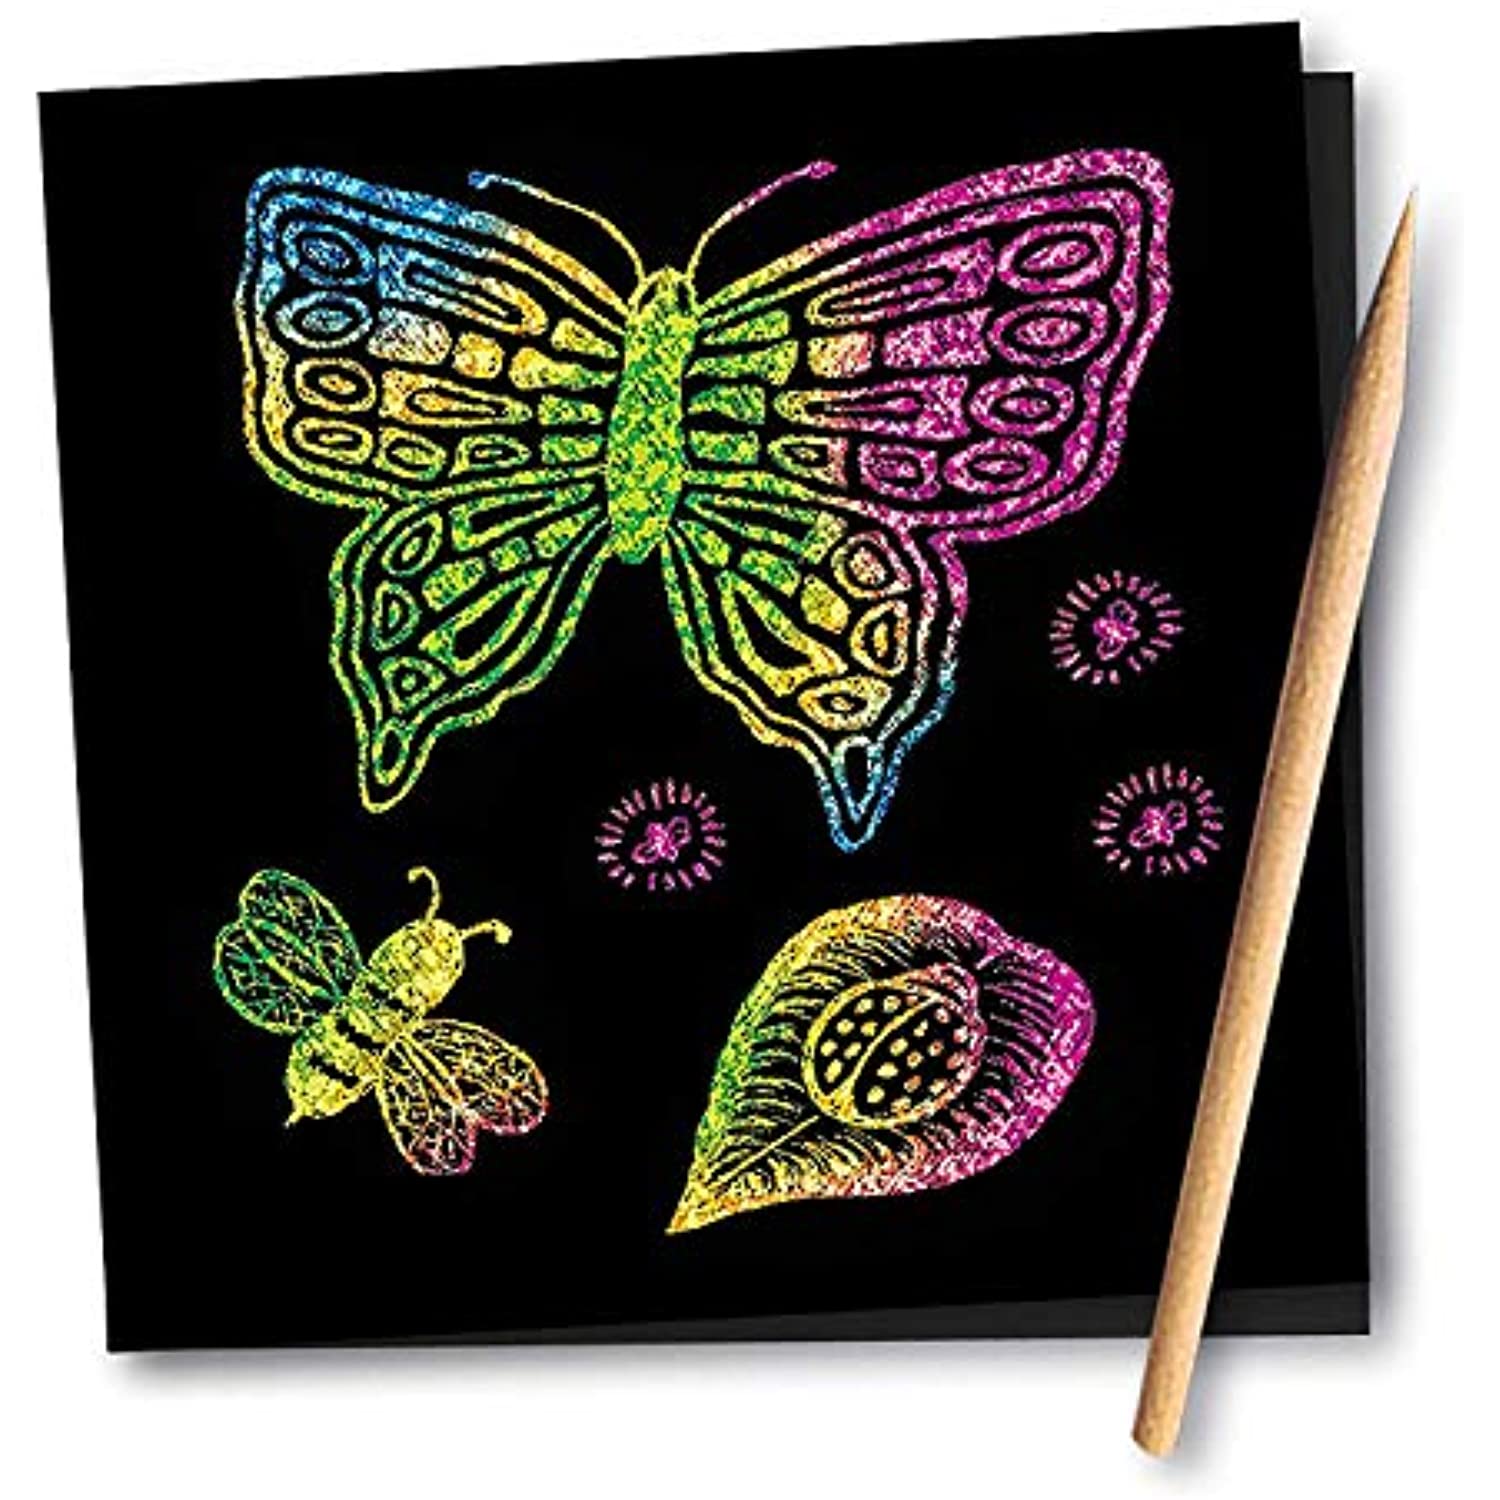 Melissa & Doug Scratch Art Doodle Pad with 16 Scratch-Art Boards and Wooden Stylus with Gift Cards